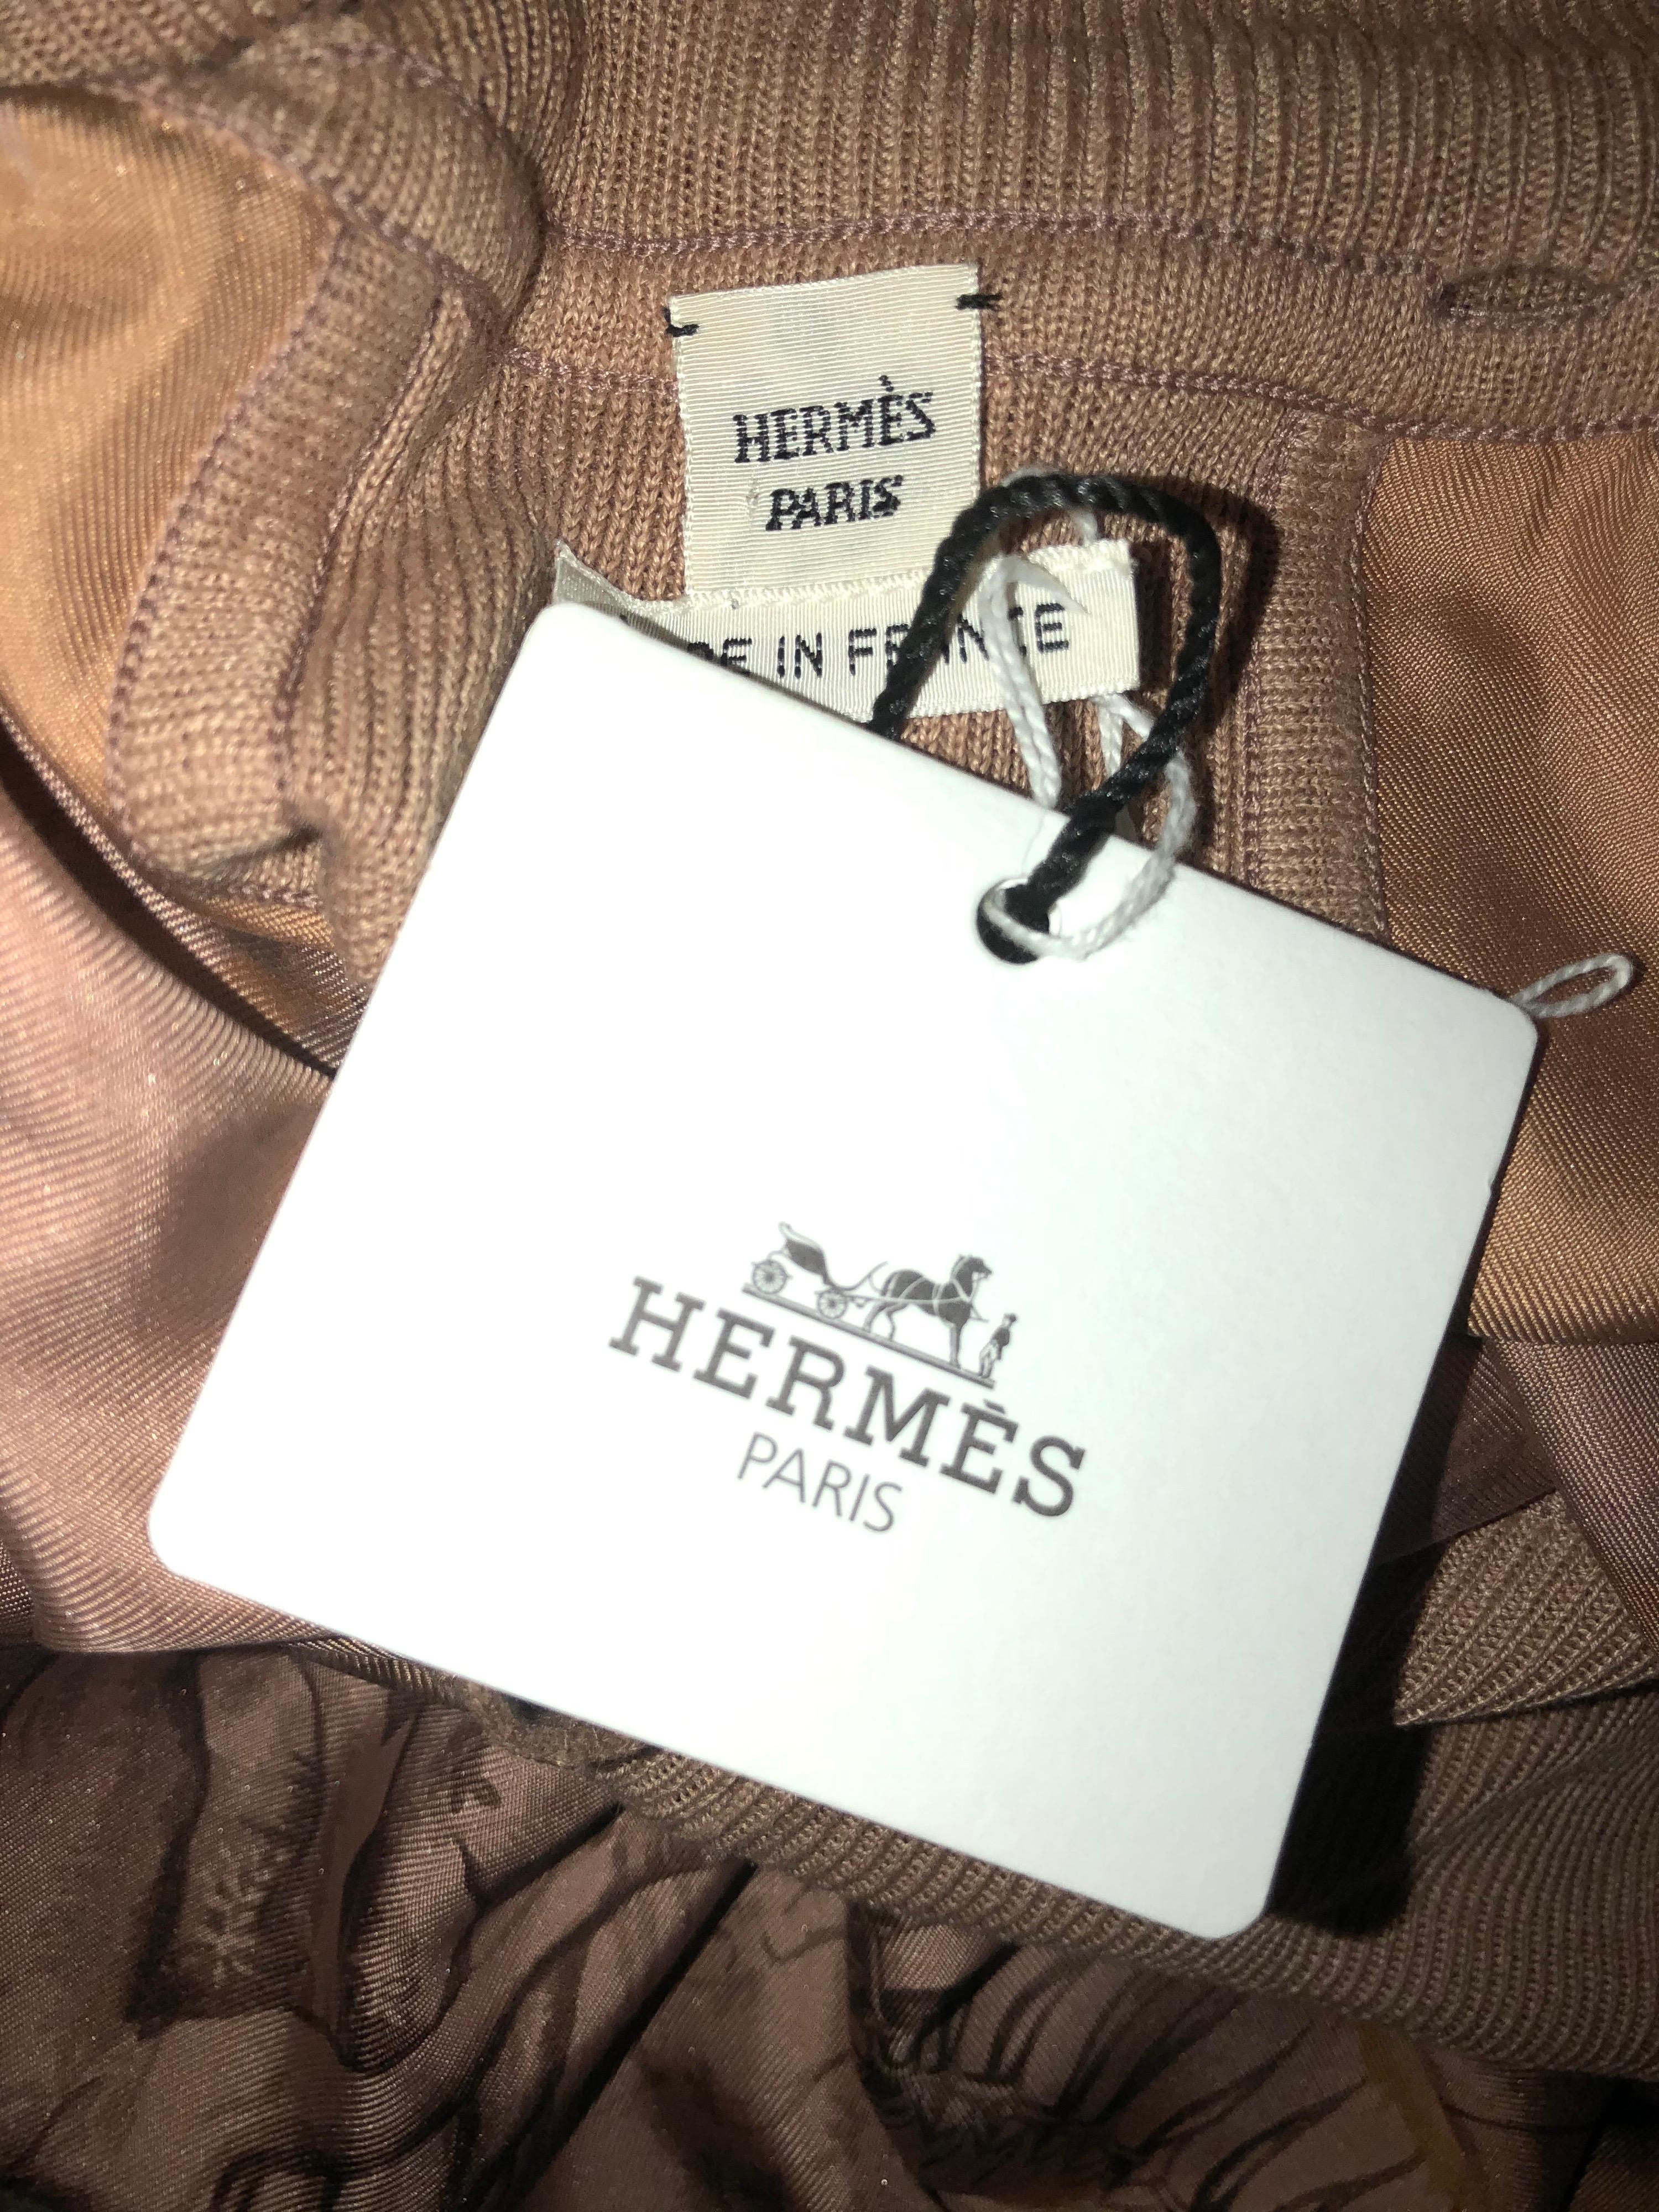 NEW Stunning HERMES Paris Printed Silk & Leather Belted Dress 4